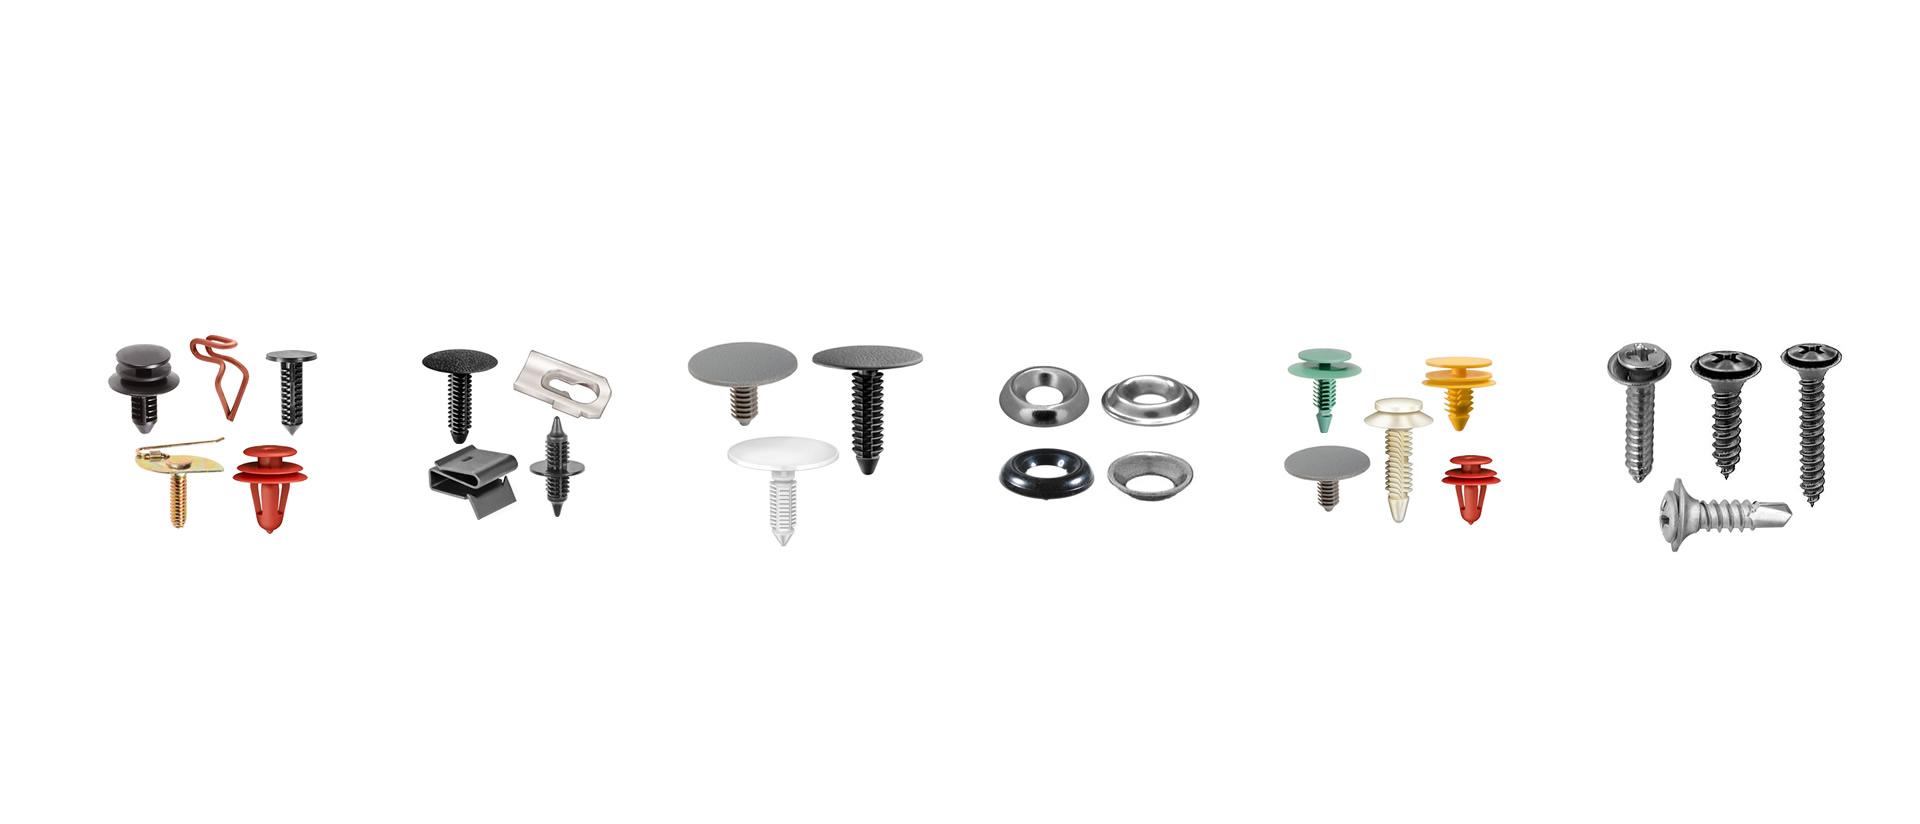 Snaps, Clips, & Fasteners